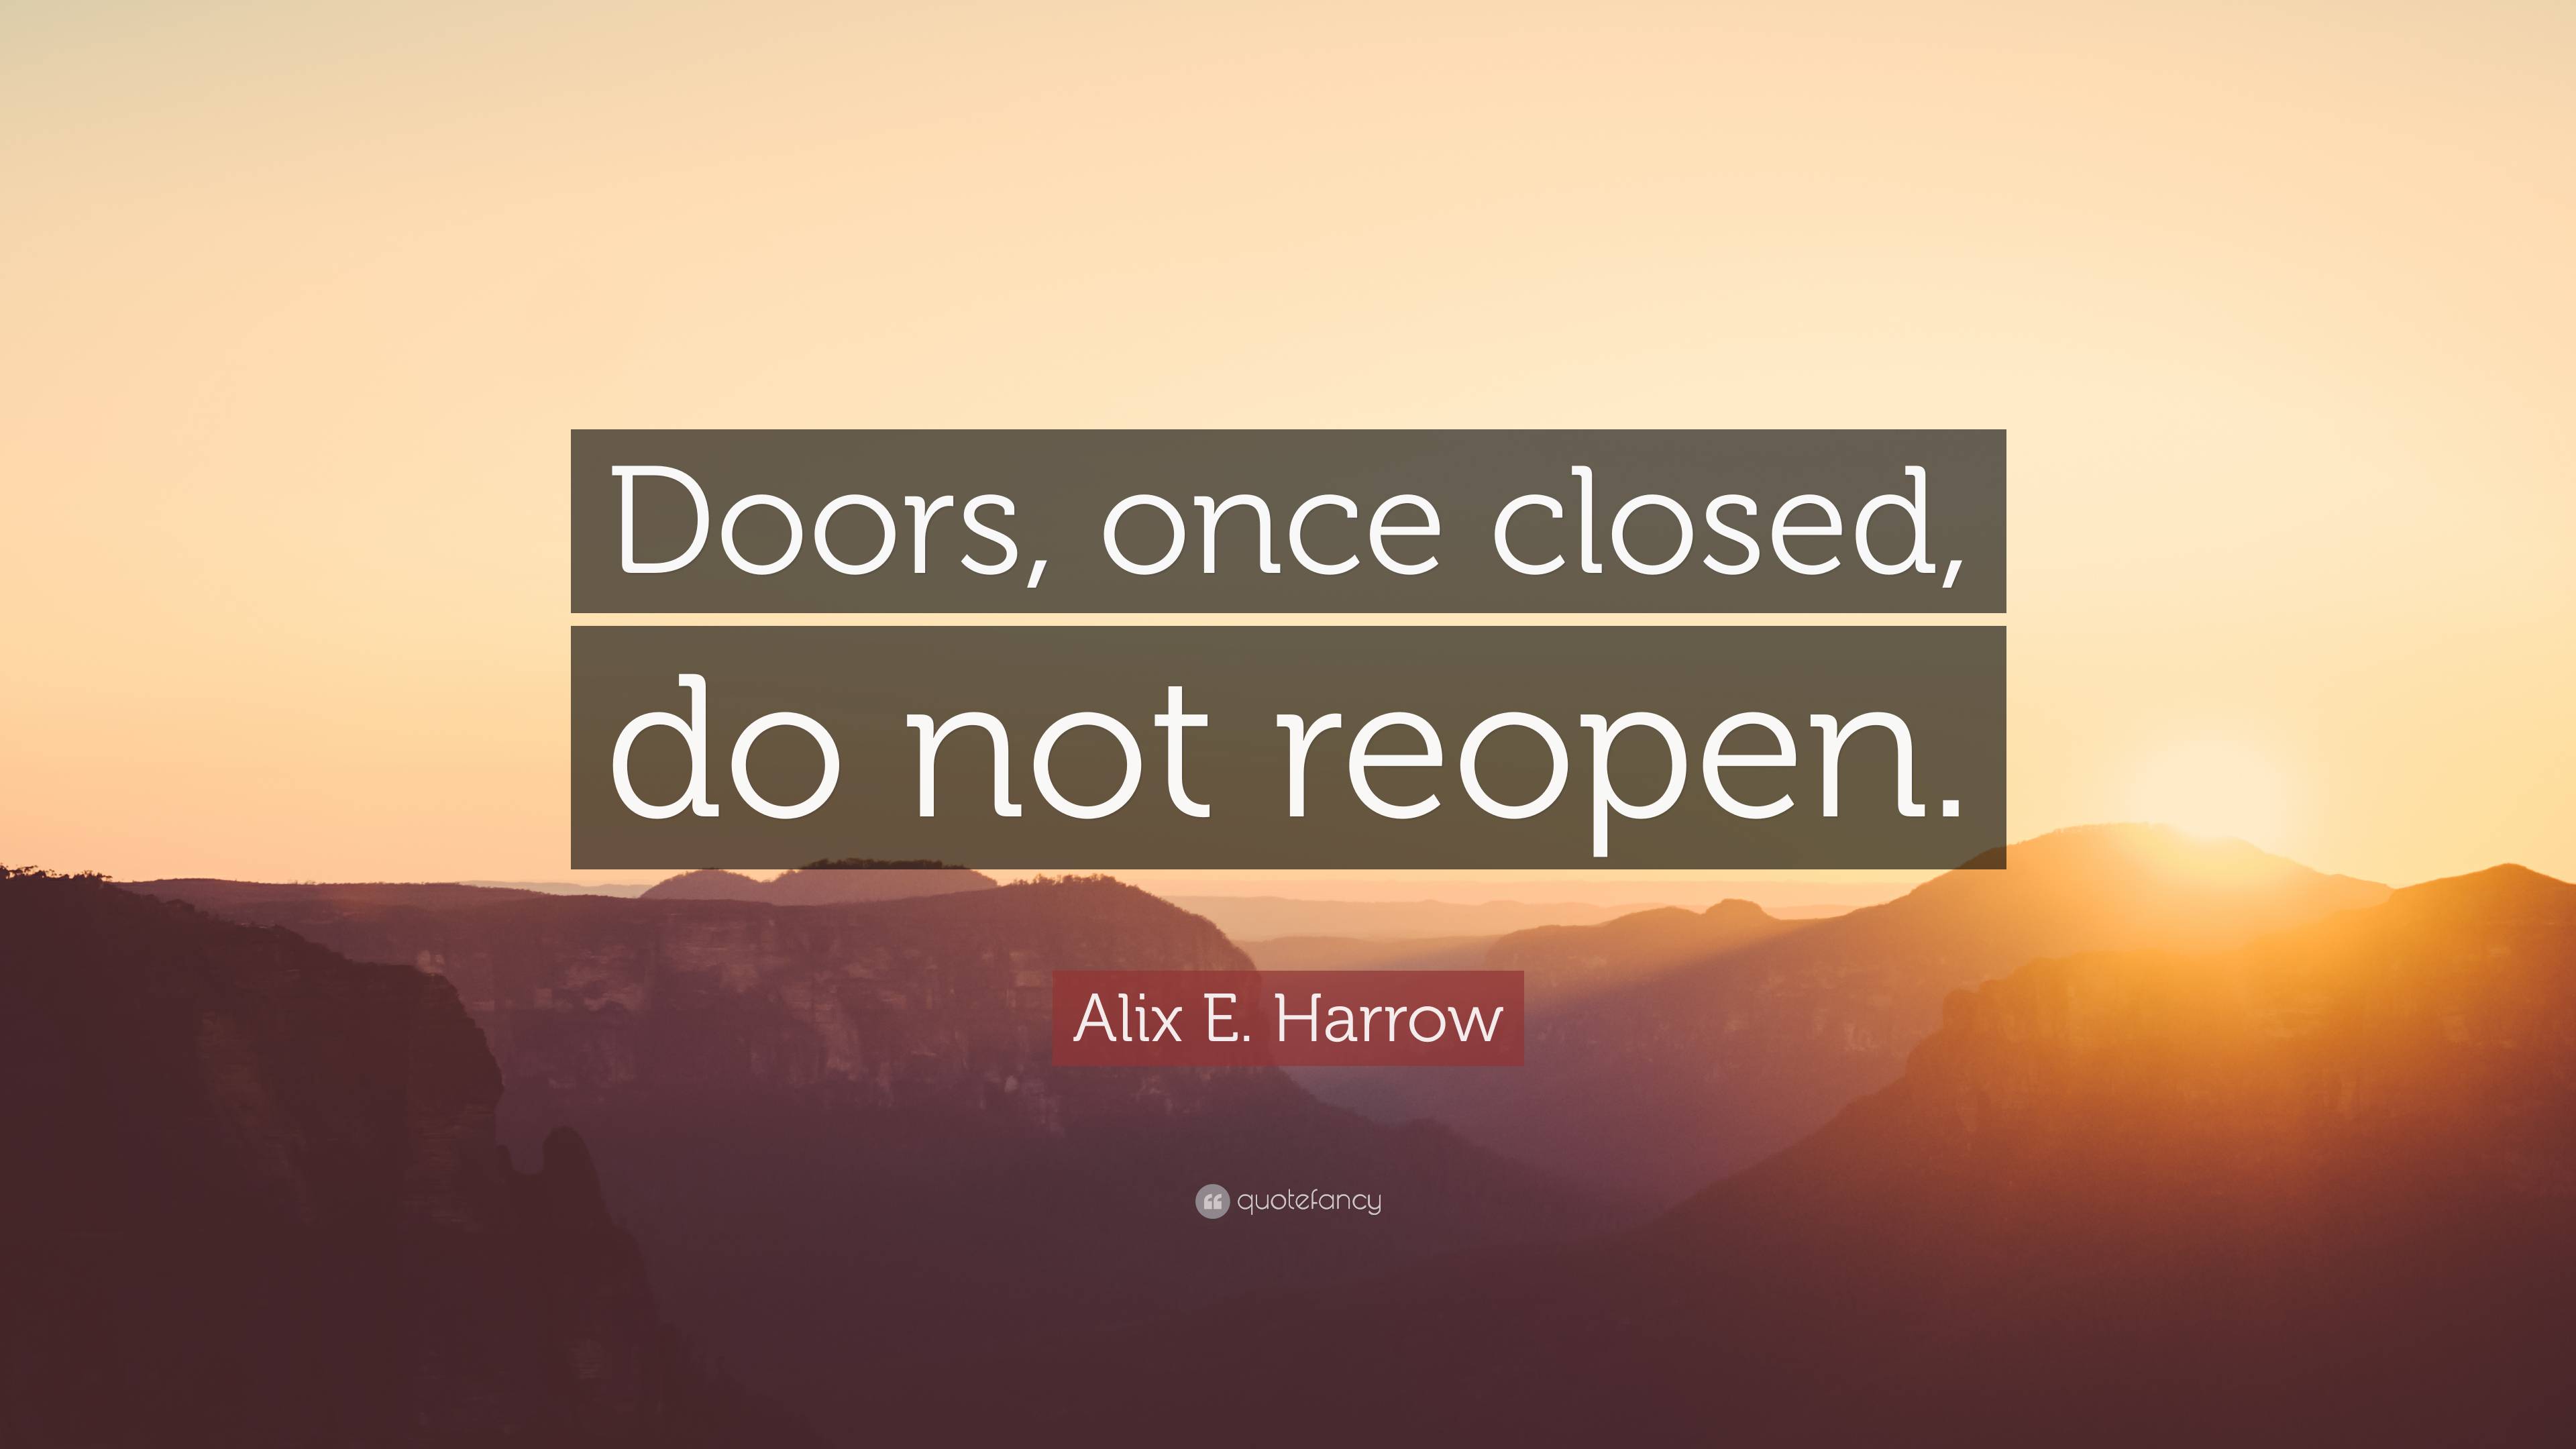 Alix E. Harrow Quote: “Doors, once closed, do not reopen.”